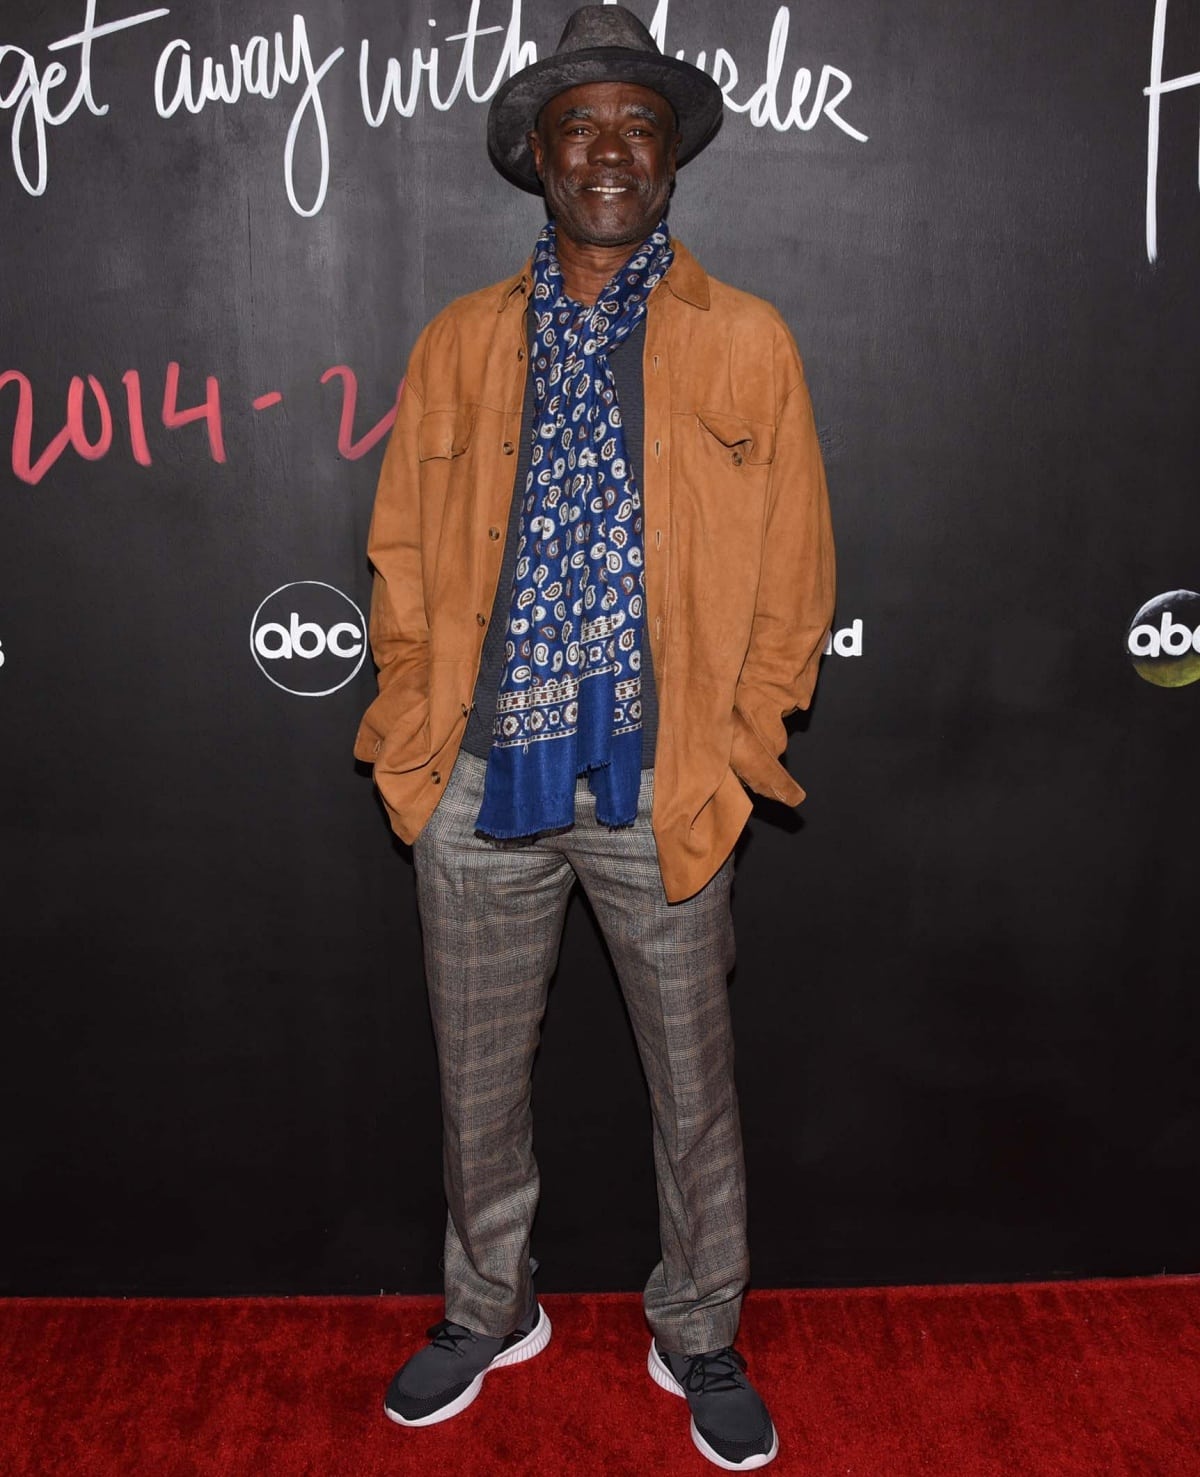 Glynn Turman at the series finale premiere of How to Get Away with Murder